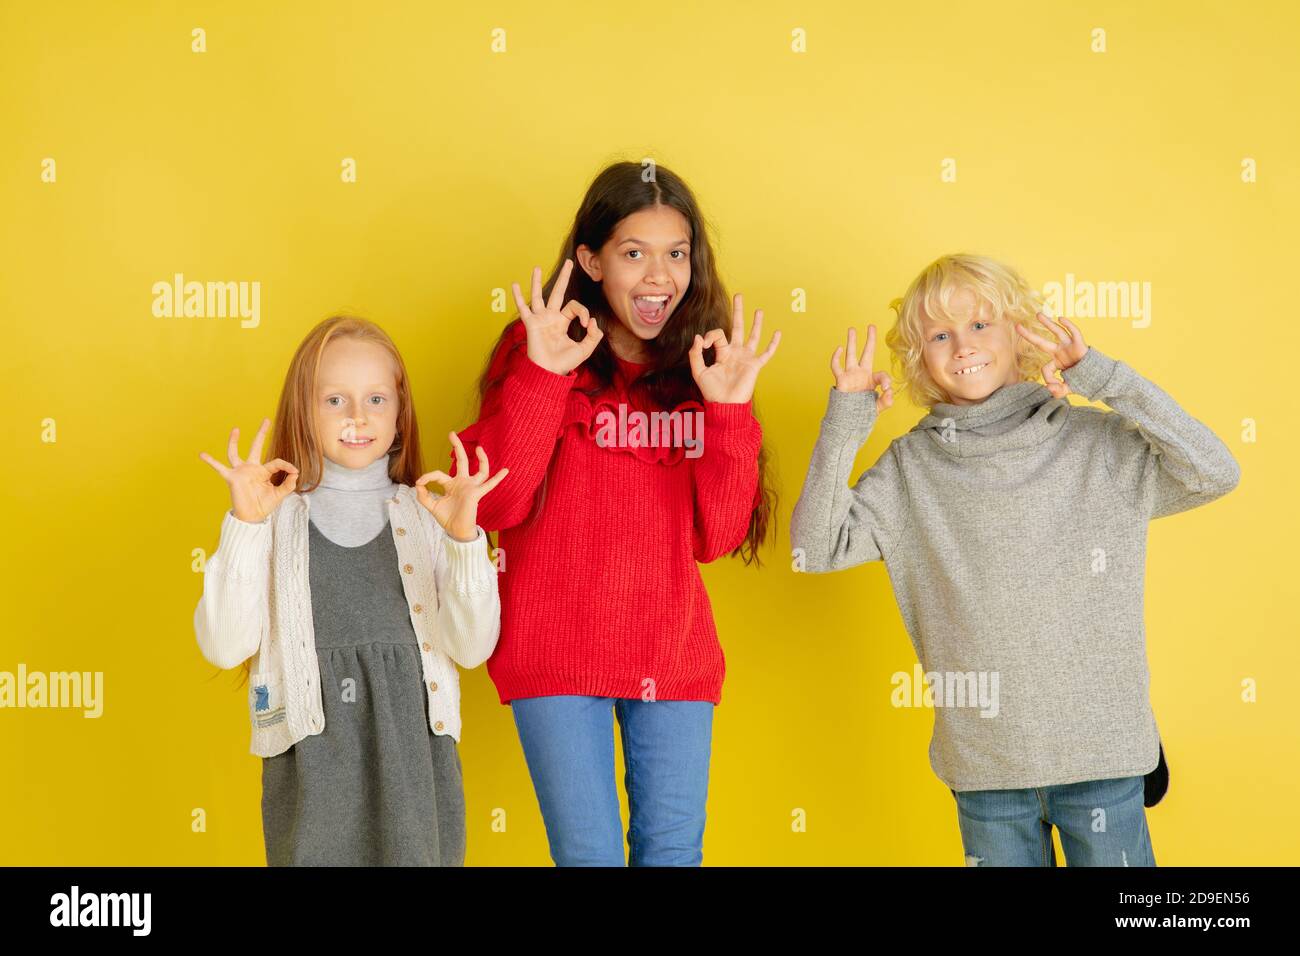 Nice signs, gesturing. Portrait of little caucasian children isolated on yellow studio background with copyspace. Beautiful teen models. Concept of human emotions, facial expression, sales, ad, youth. Stock Photo